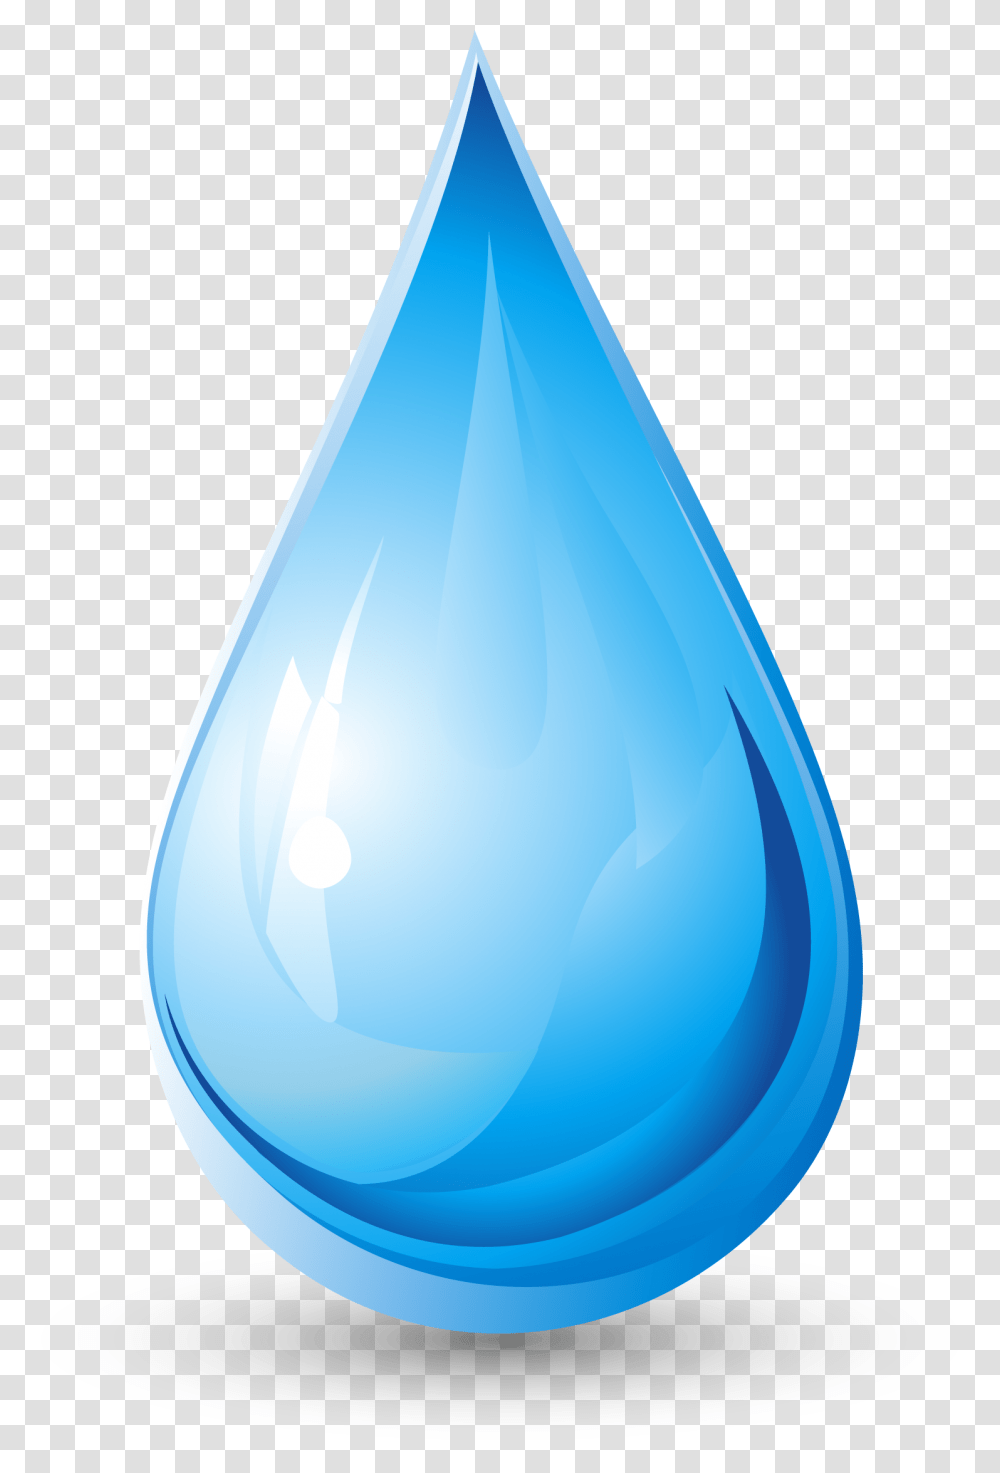 Water Droplets Drop Clipart Download Free Background Water Drop, Lamp Transparent Png